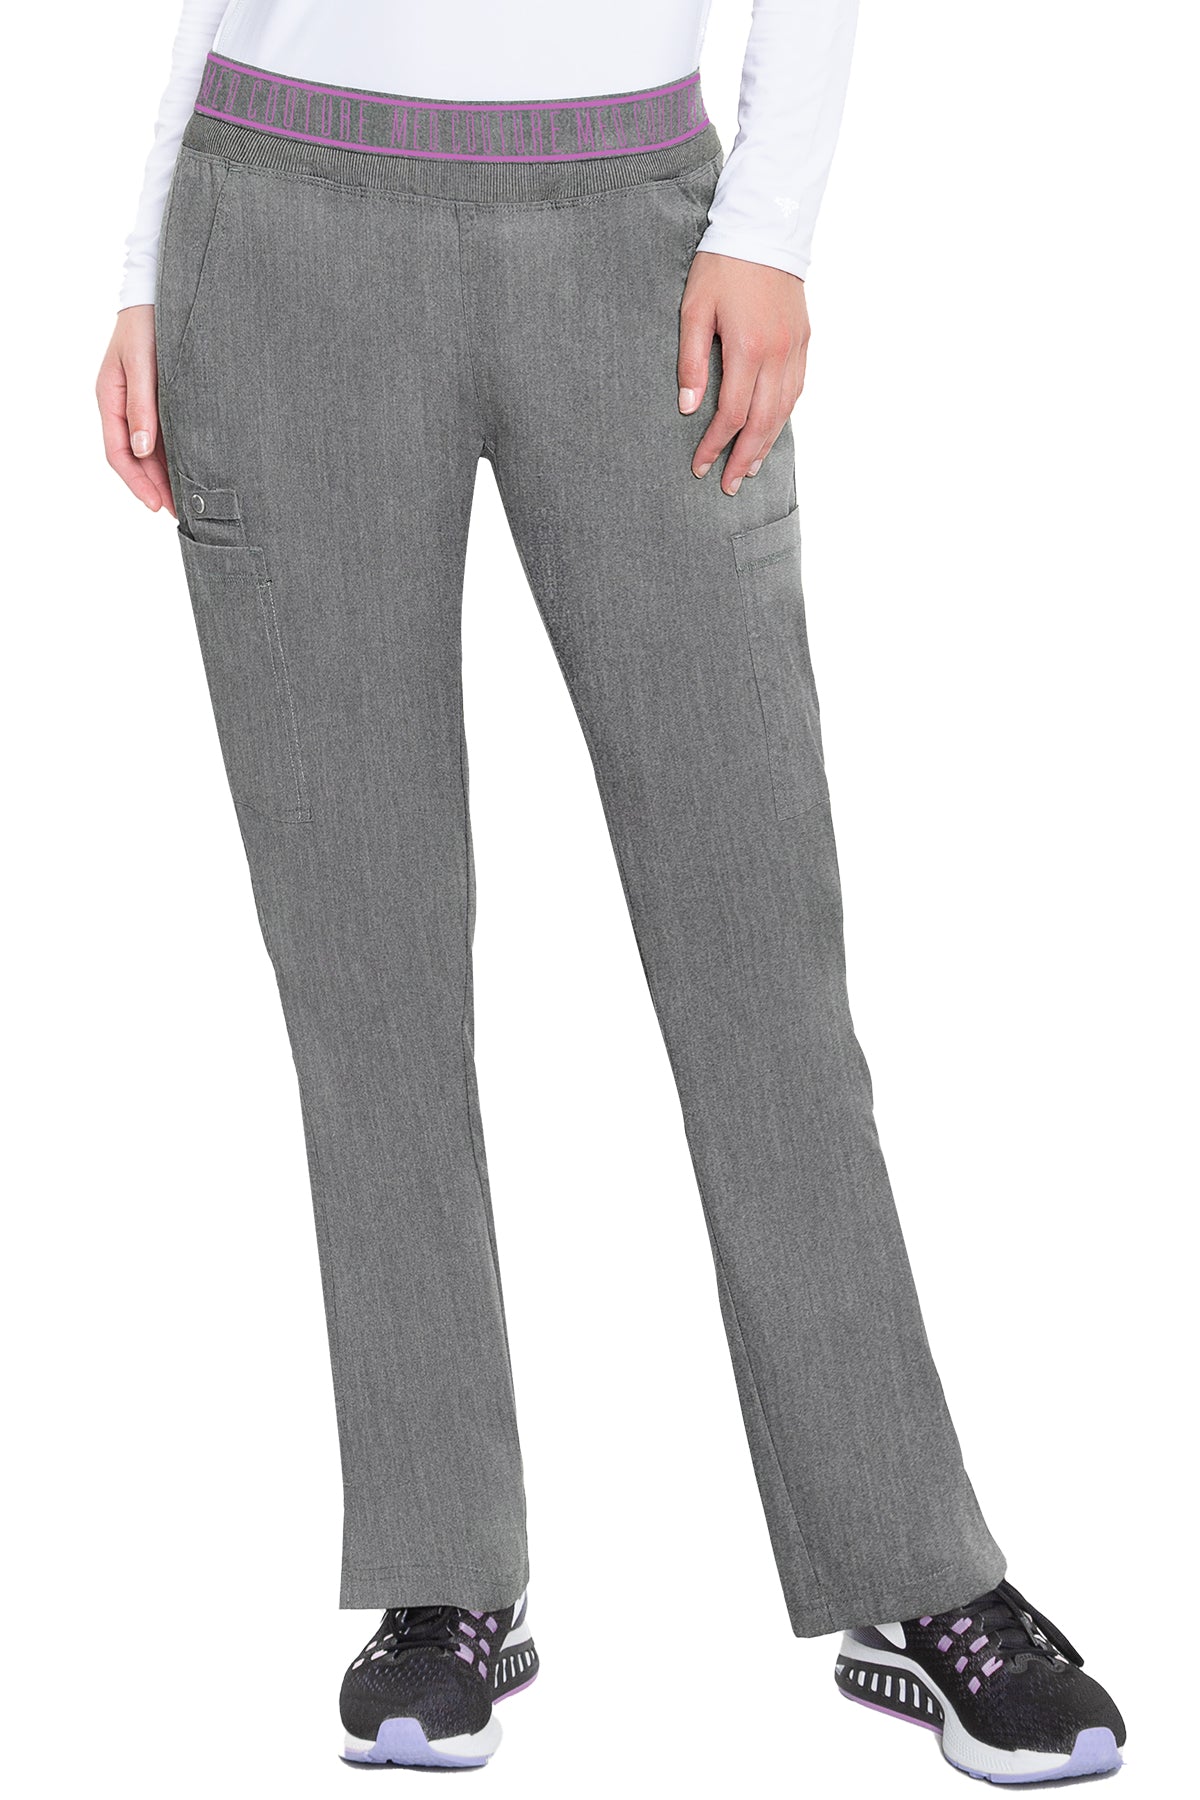 Yoga 2 Cargo Pocket Pant by Med Couture (Regular) XS-5XL/ Slate